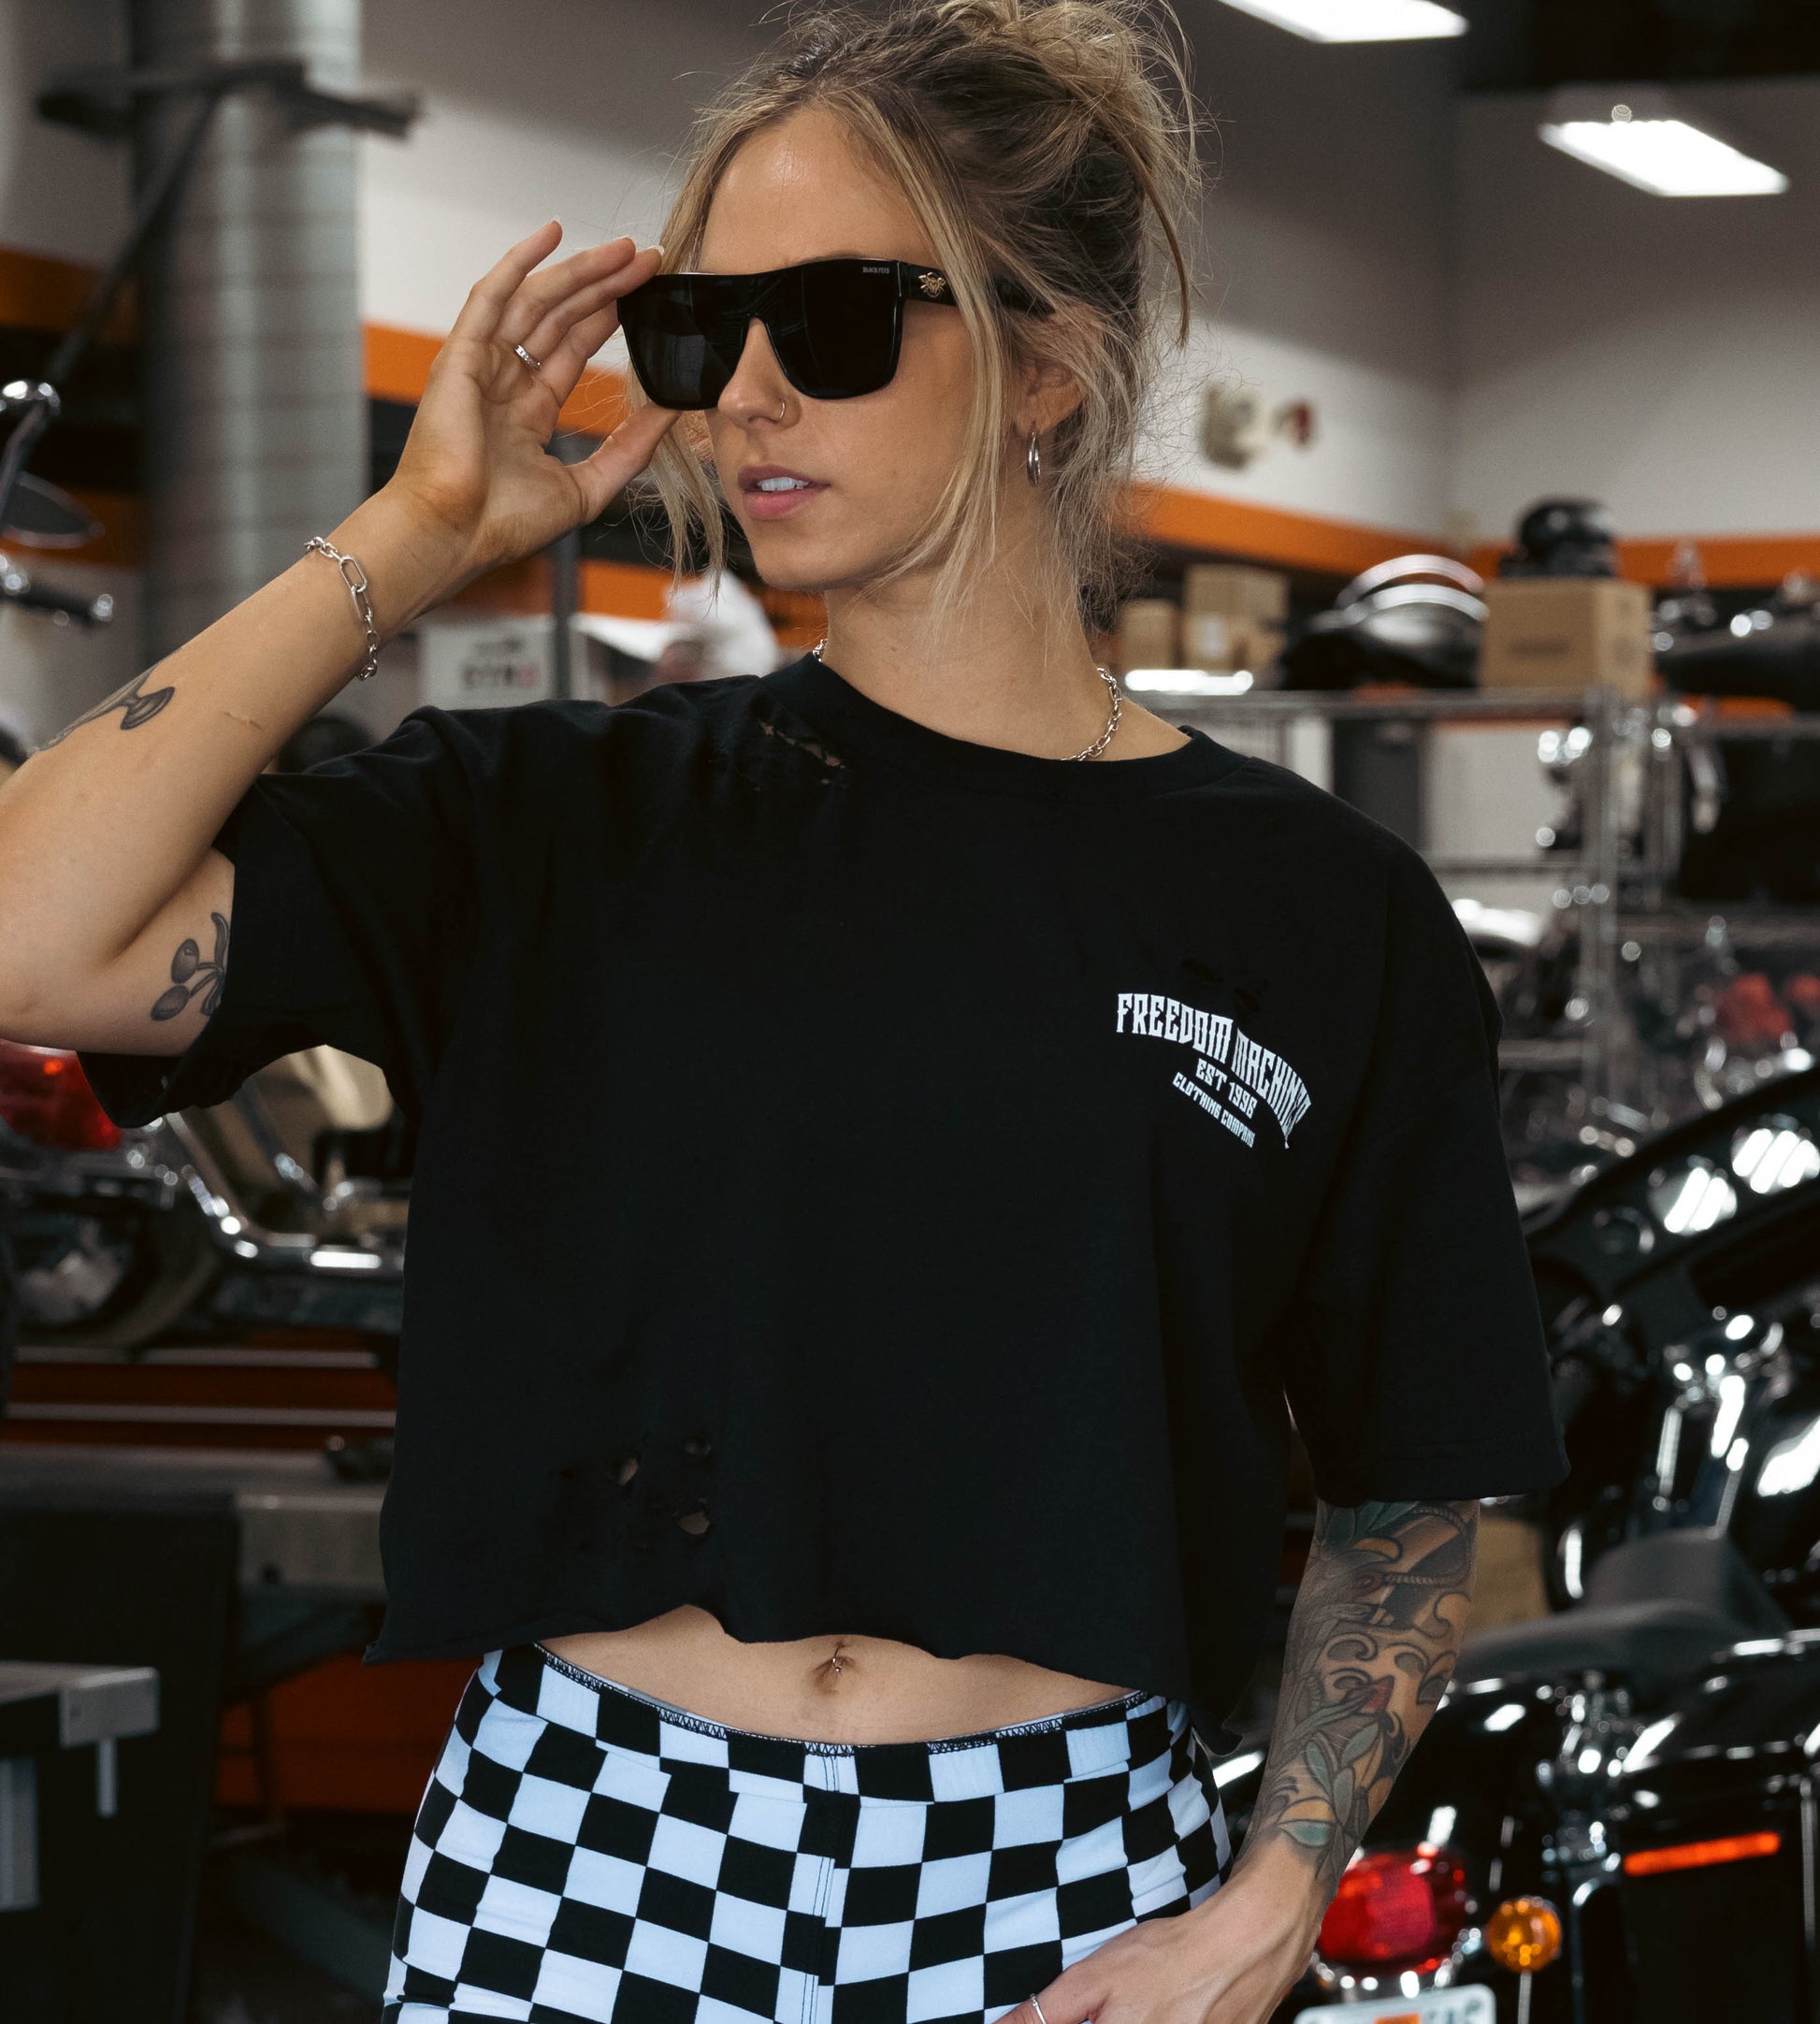 Hand distressed black crop top for women. Picture is taken in a motorcycle garage. 